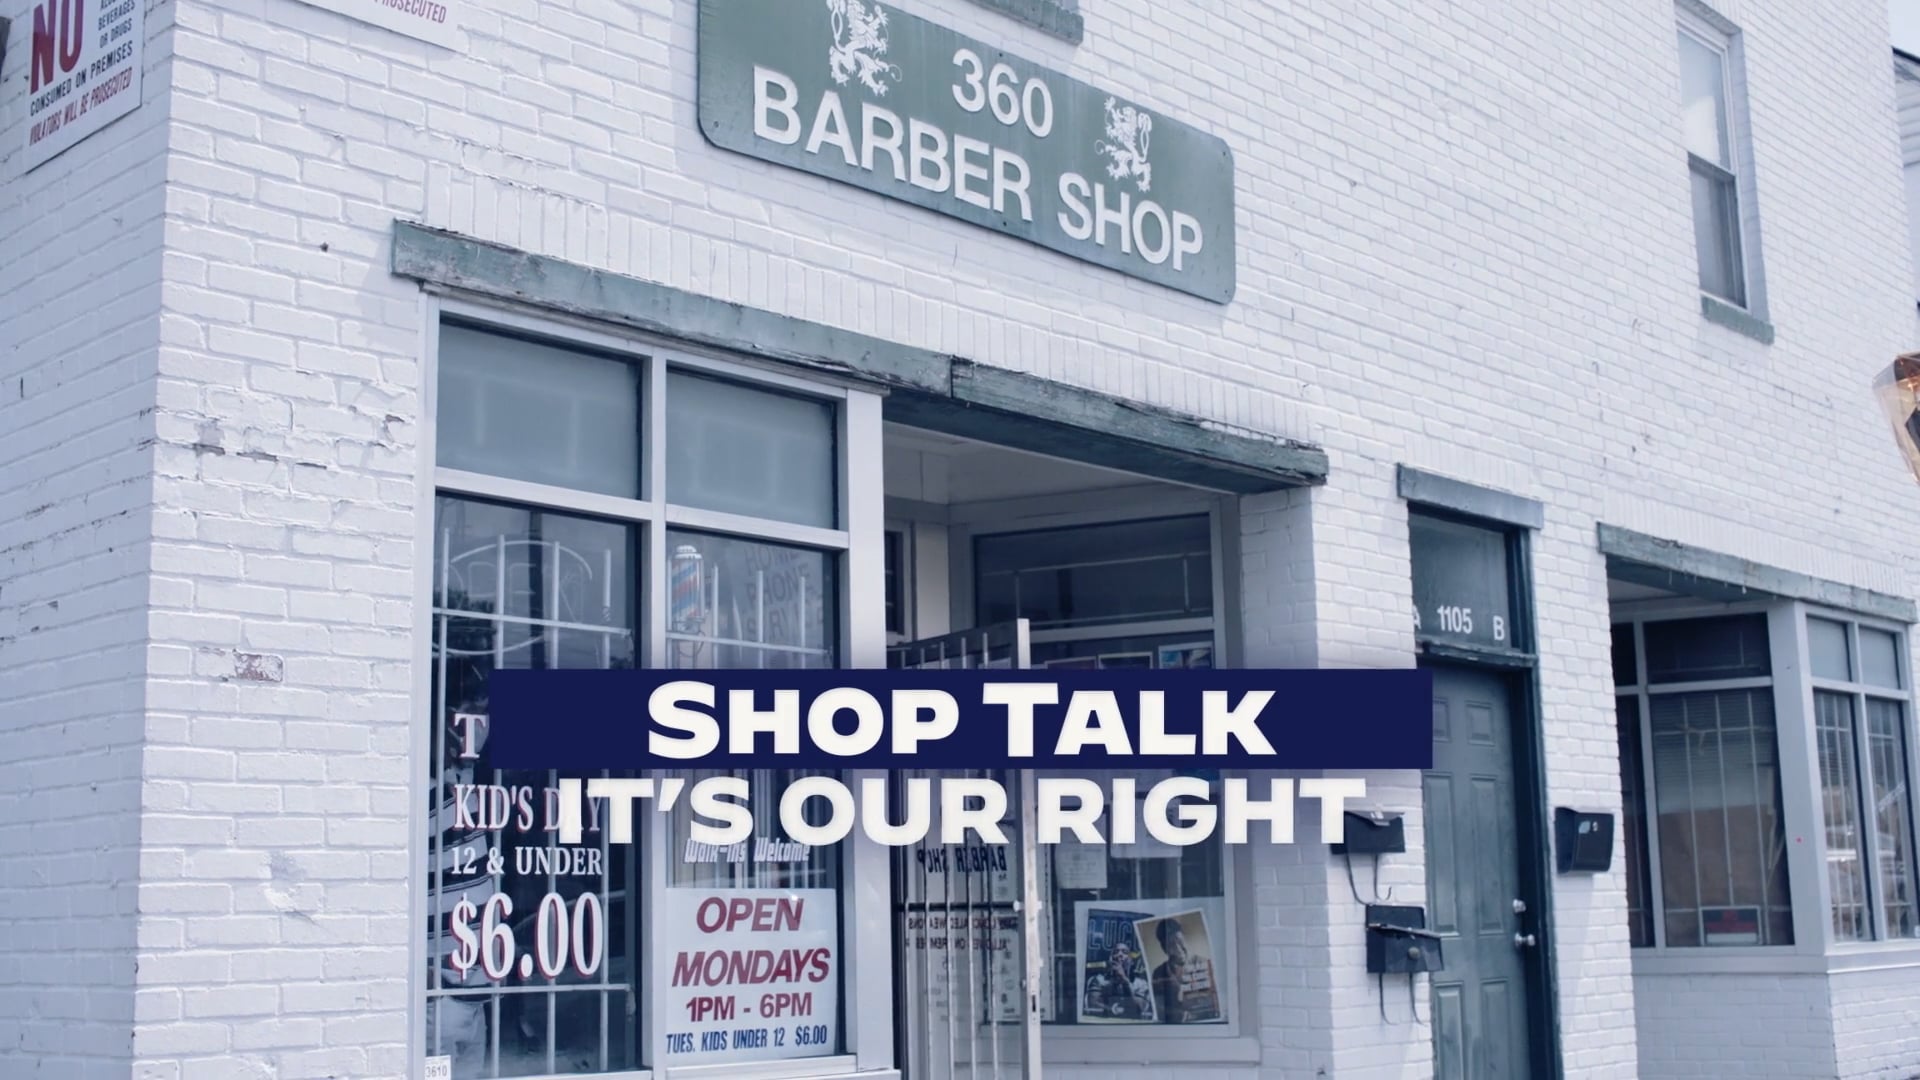 Biden for President - Barbershop: Our Right